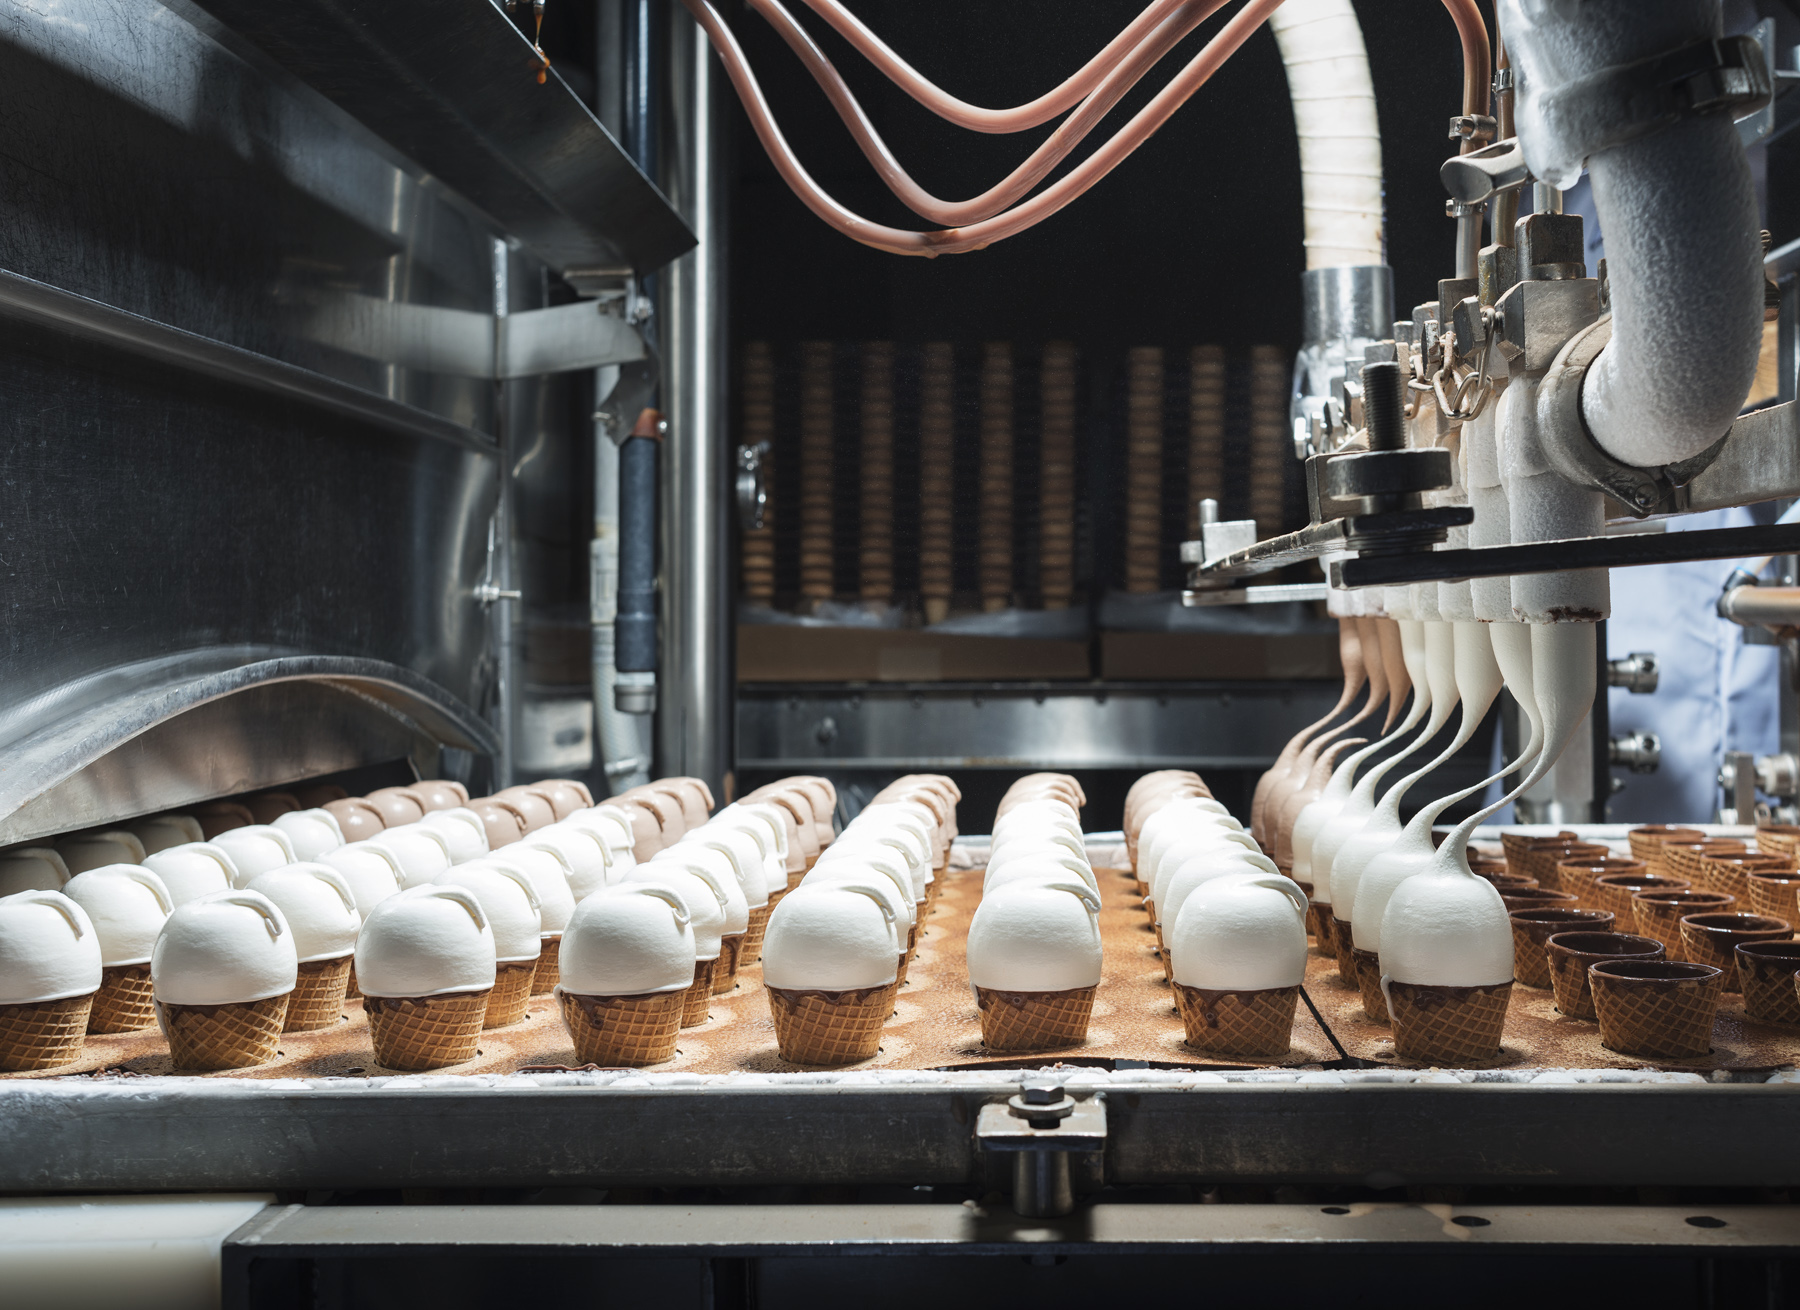  A series of photos for WIRED Magazine illustrating the process of making Nestle's Drumstick Ice creams. Photographs were taken at Nestle Headquarters in Bakersfield, CA. 